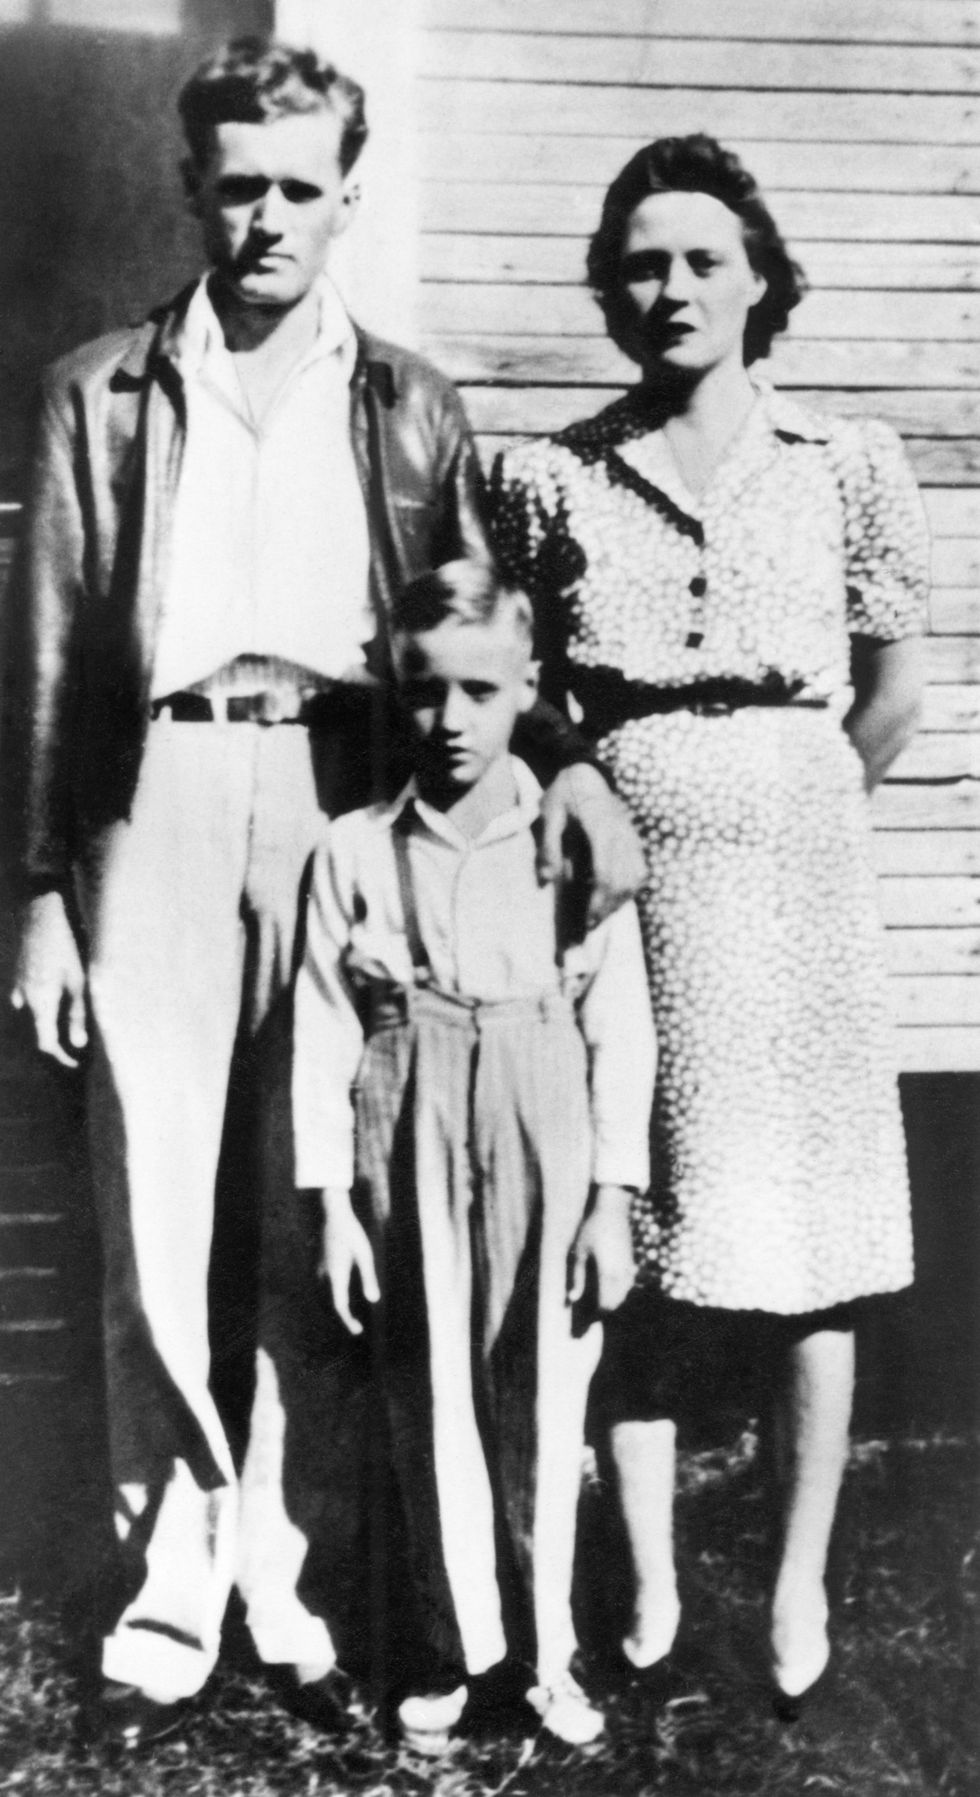 Elvis Presley, as a child with his parents—L-R: Vernon Presley, Elvis Presley (as child), Gladys Presley.